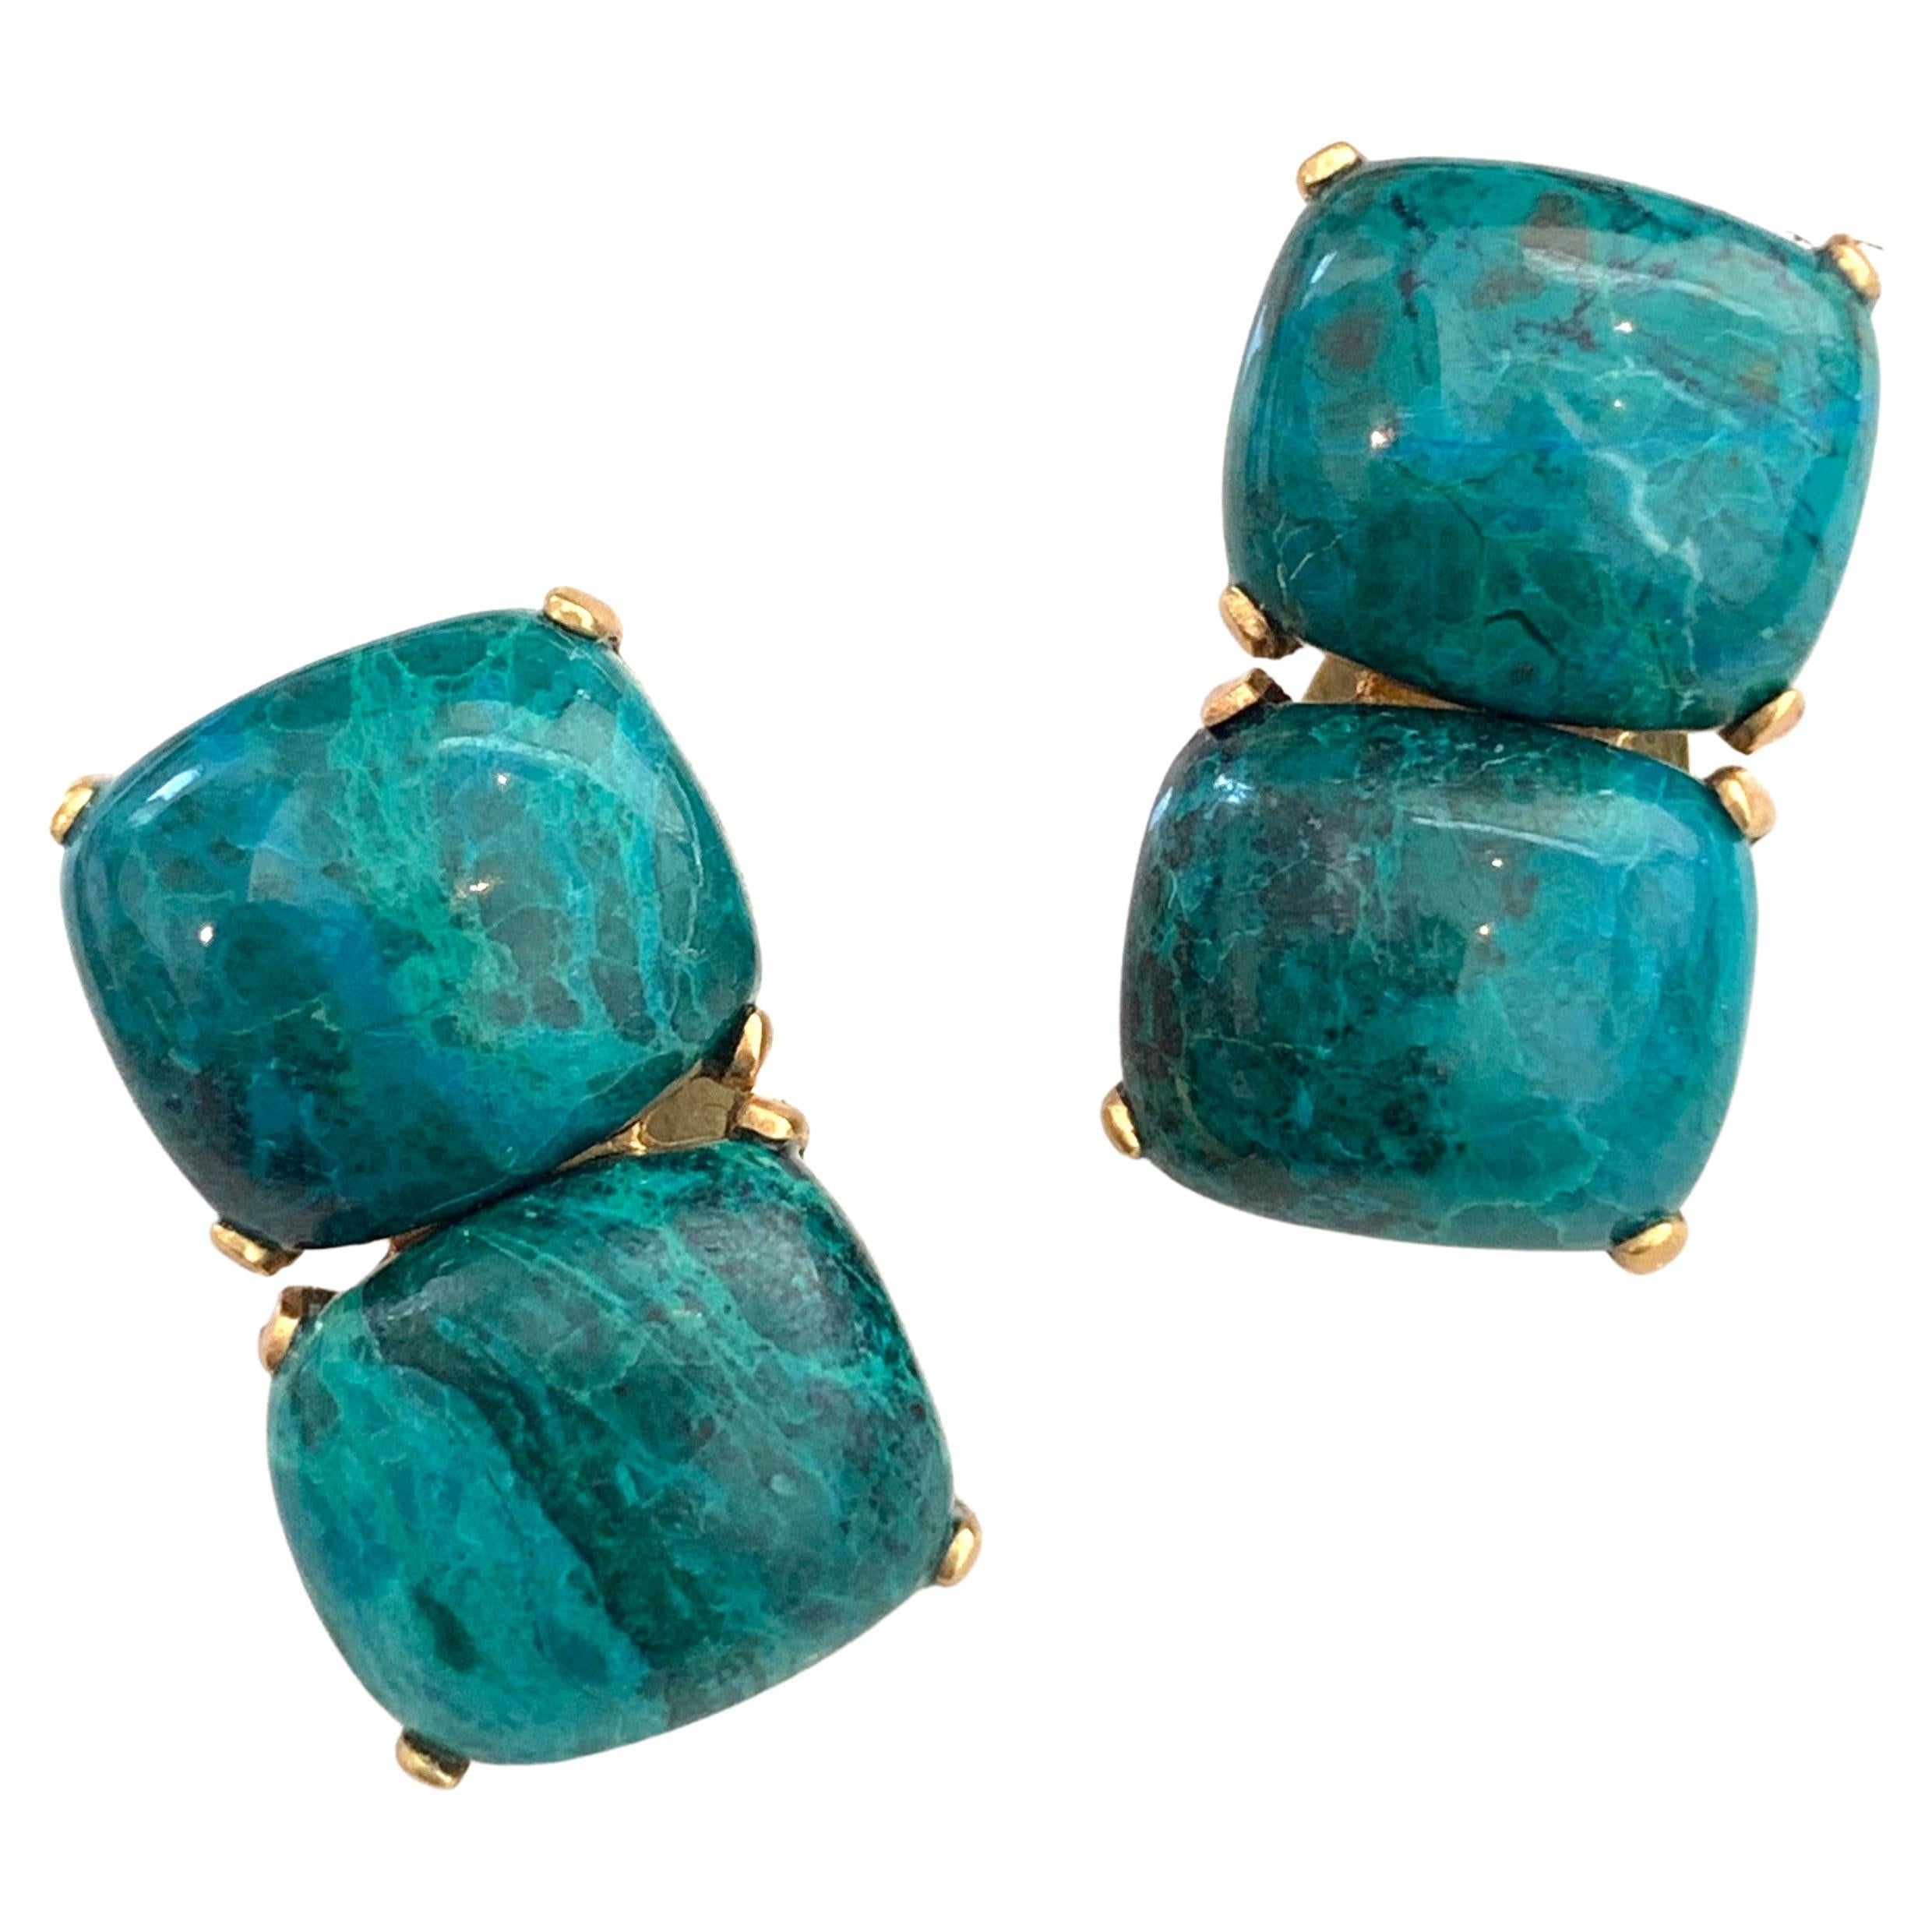 Stunning pair of Double Cushion Cabochon Chrysocolla Vermeil Clip-on Earrings